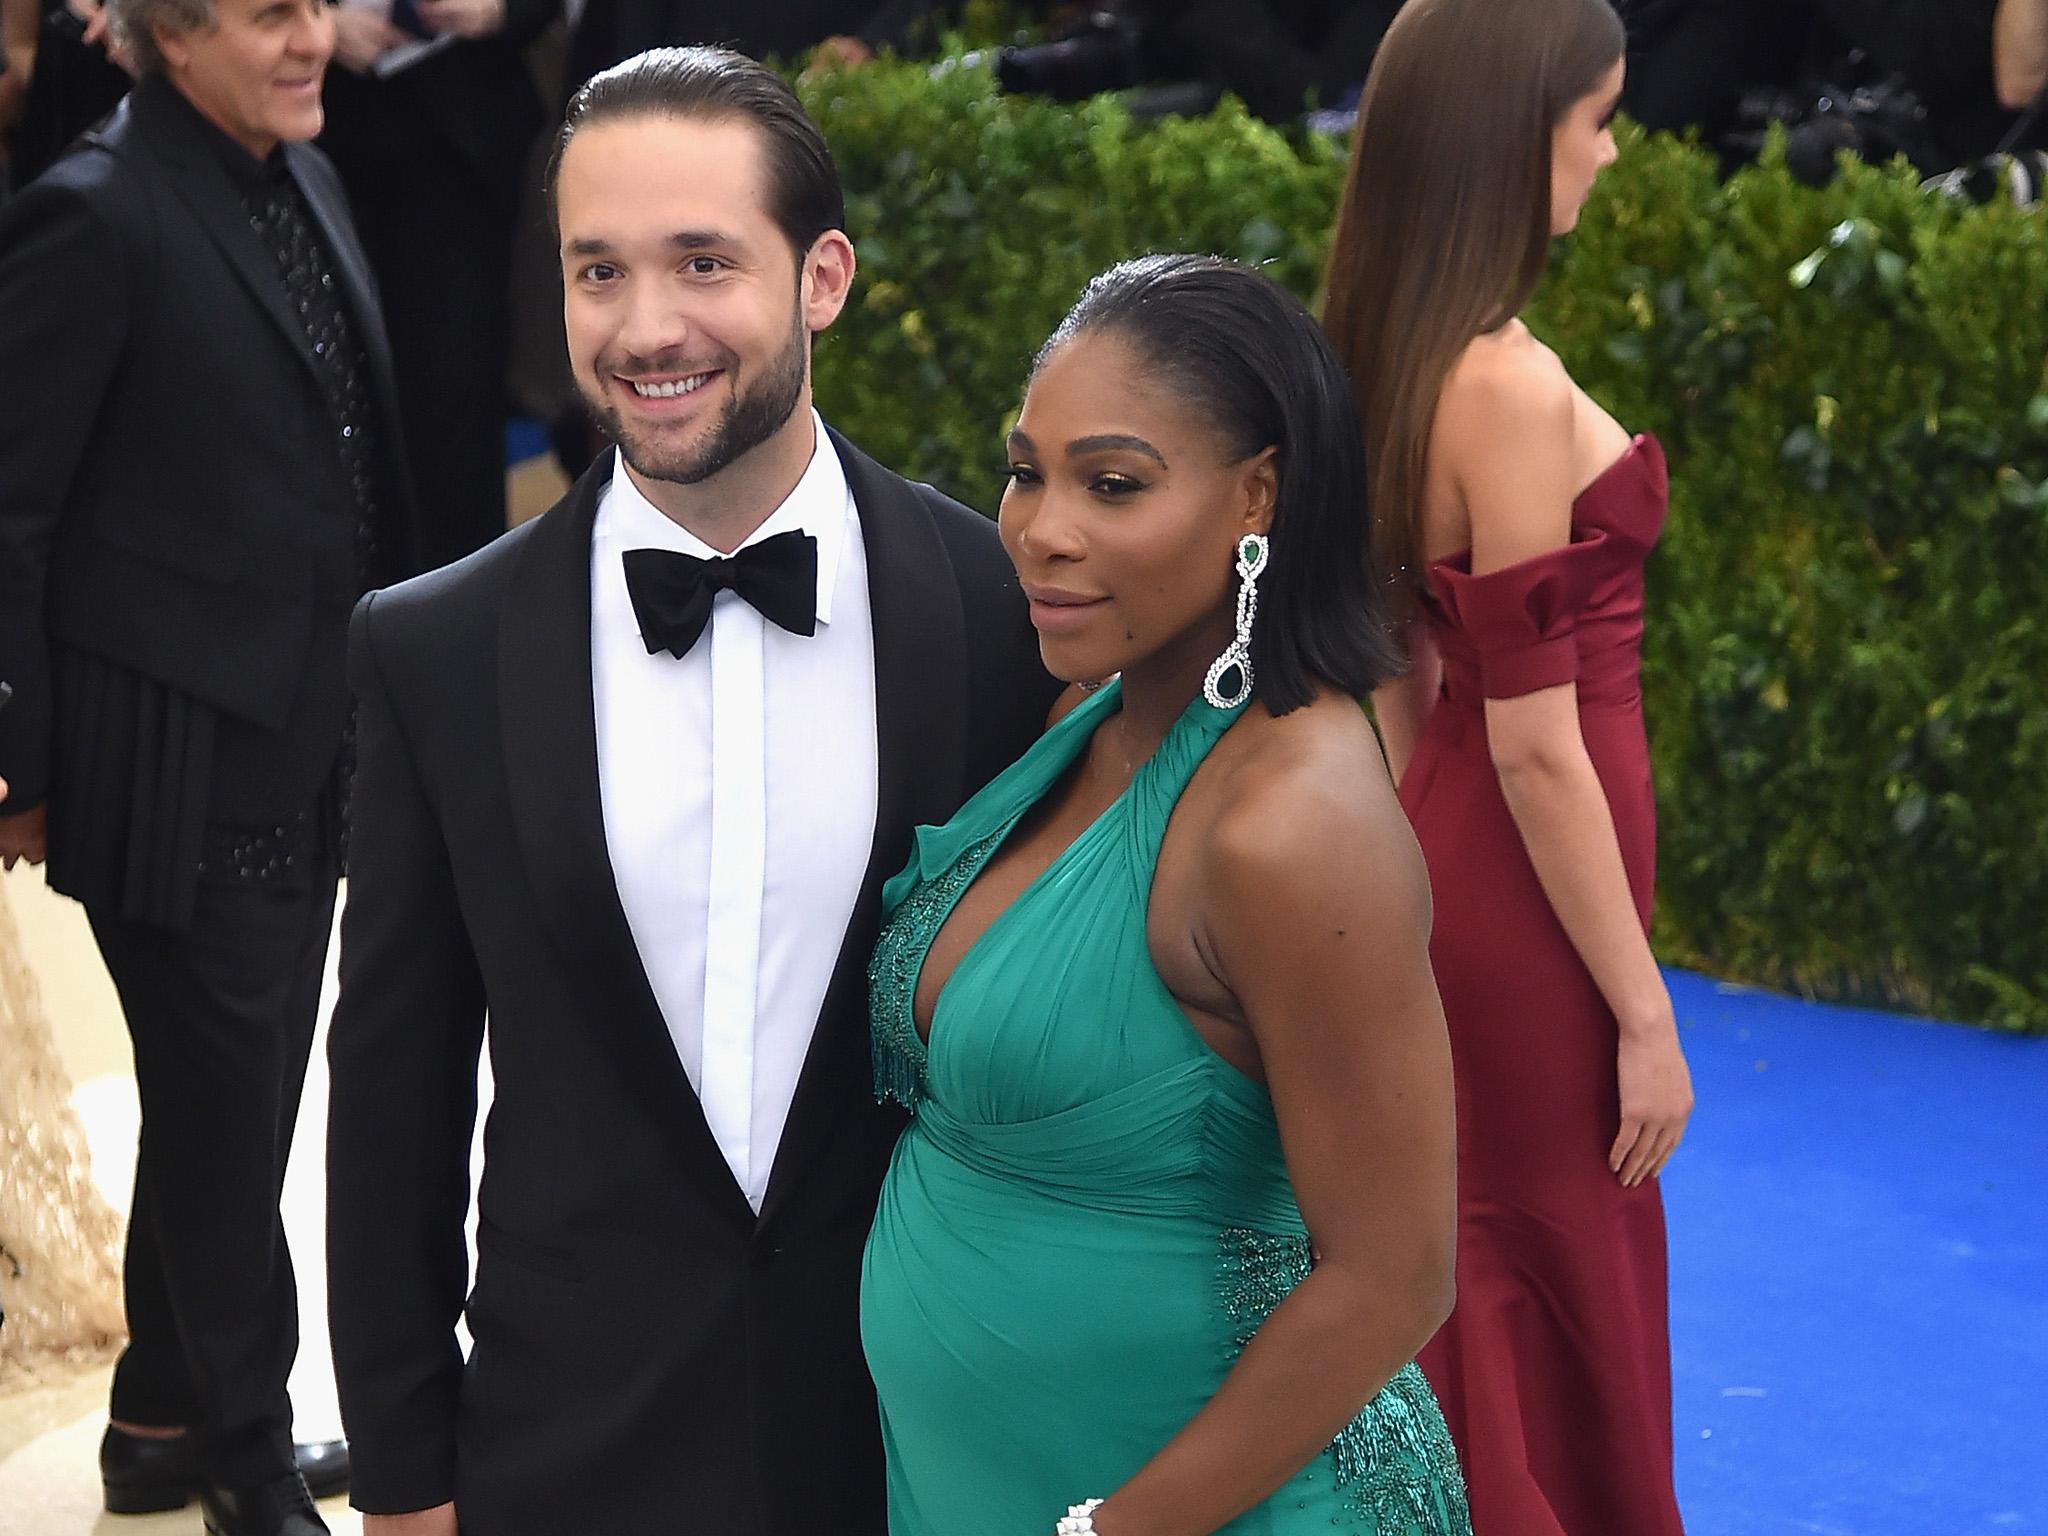 Alexis Ohanian and Serena Williams announced they were expecting their first child in April